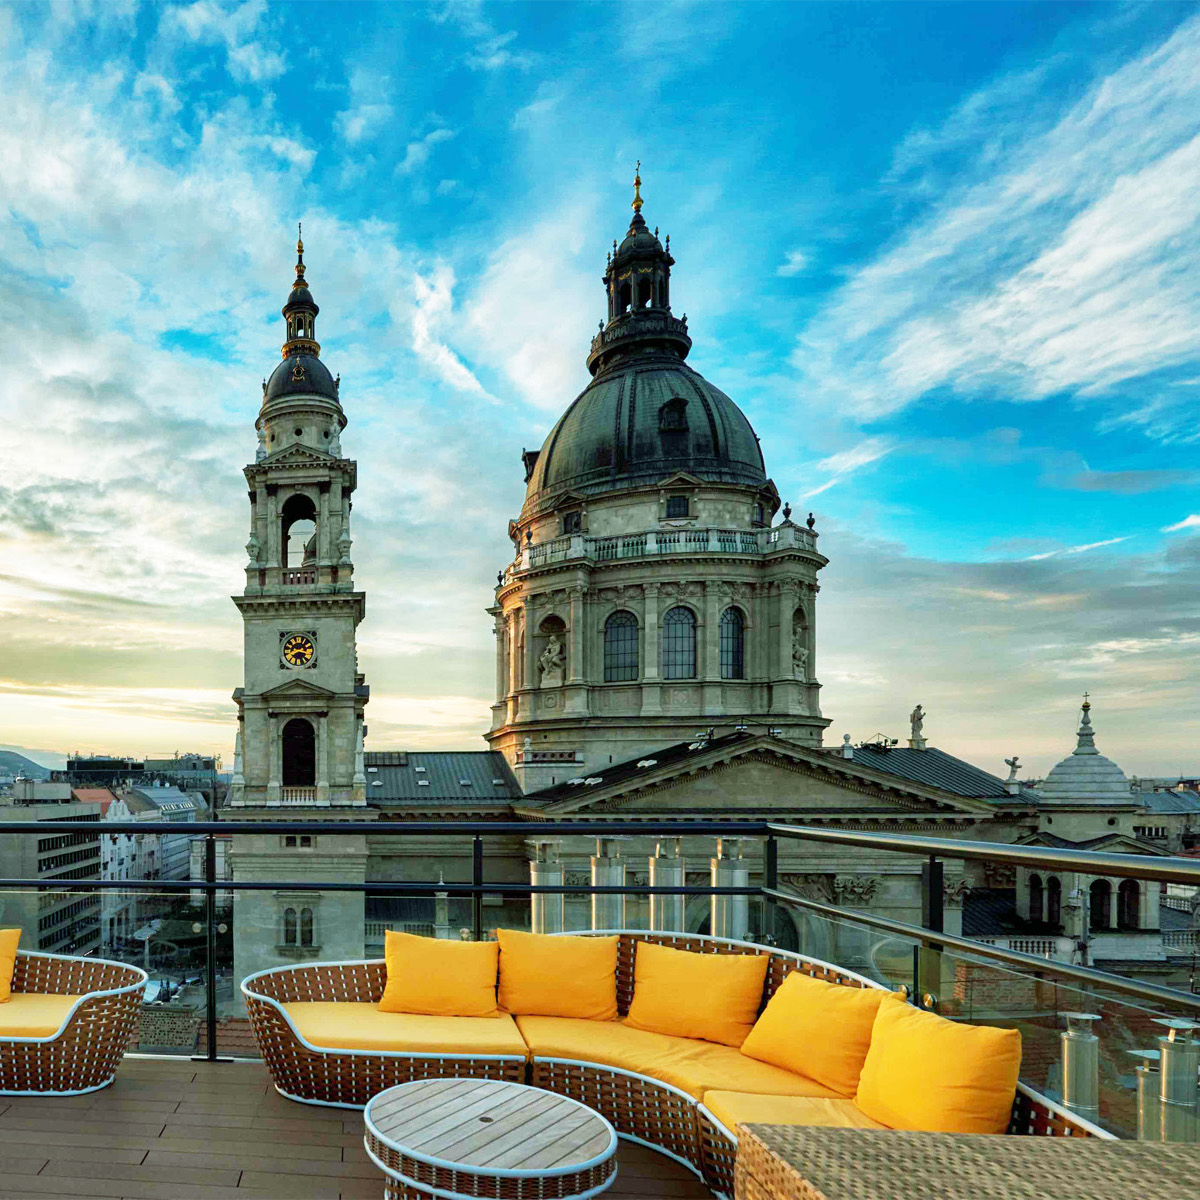 High Note Sky Bar in Budapest, Hungary